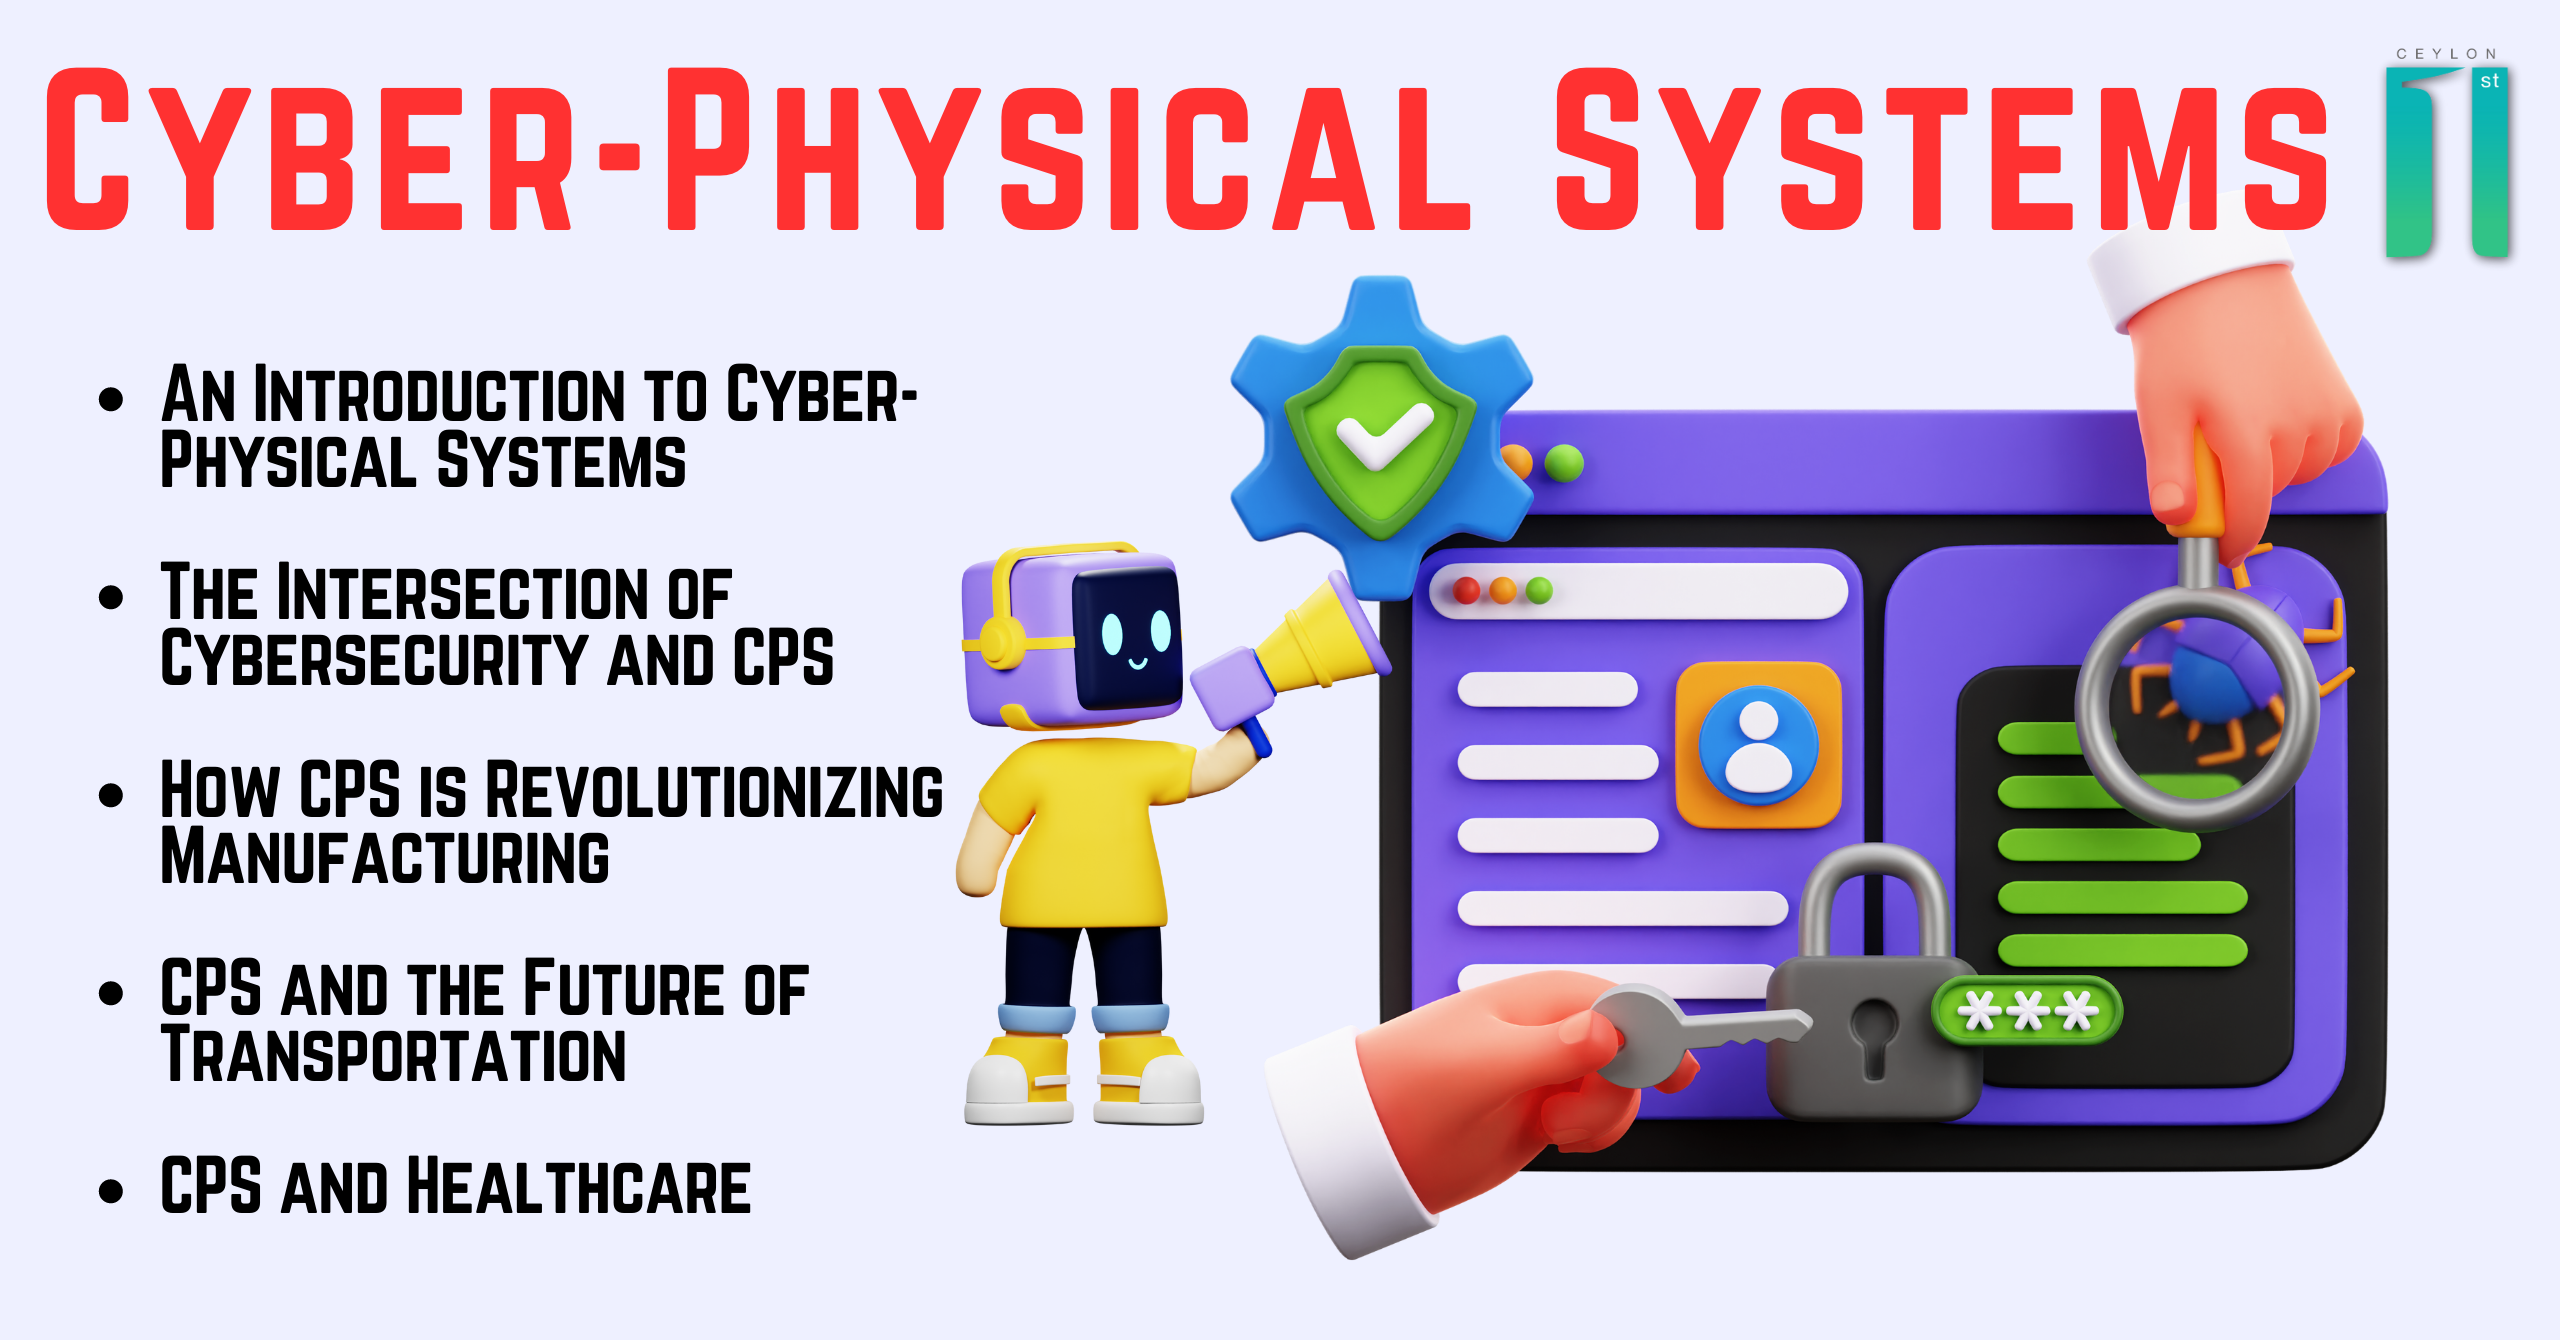 Cyber-Physical Systems